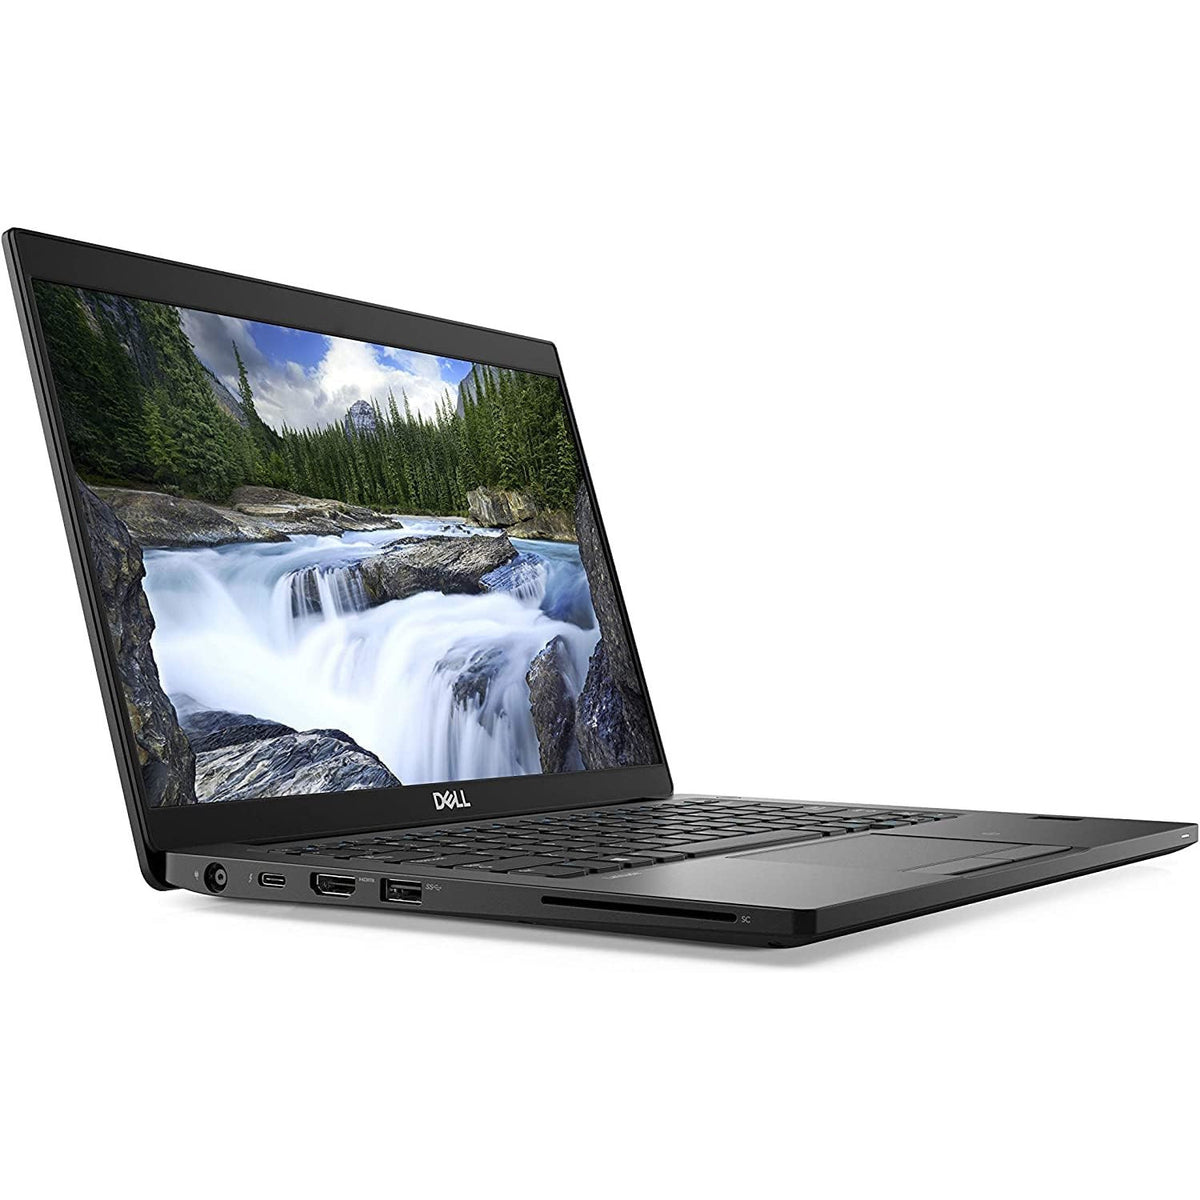 Discount PC - Left-side view of Dell Latitude 7390 Laptop